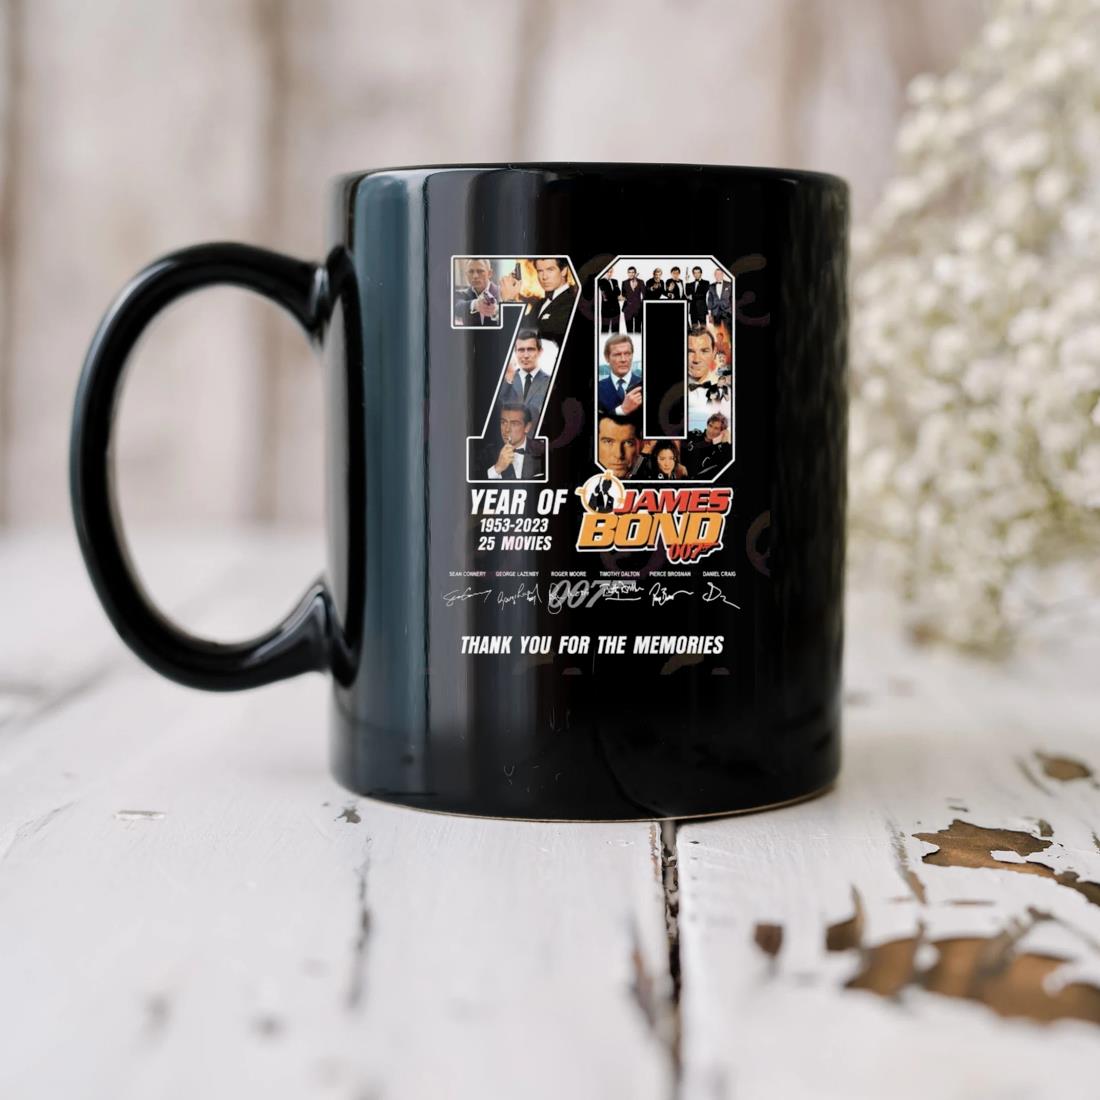 70 Years Of 1953 – 2023 25 Movies James Bond 007 Thank You For The Memories Signatures Mug